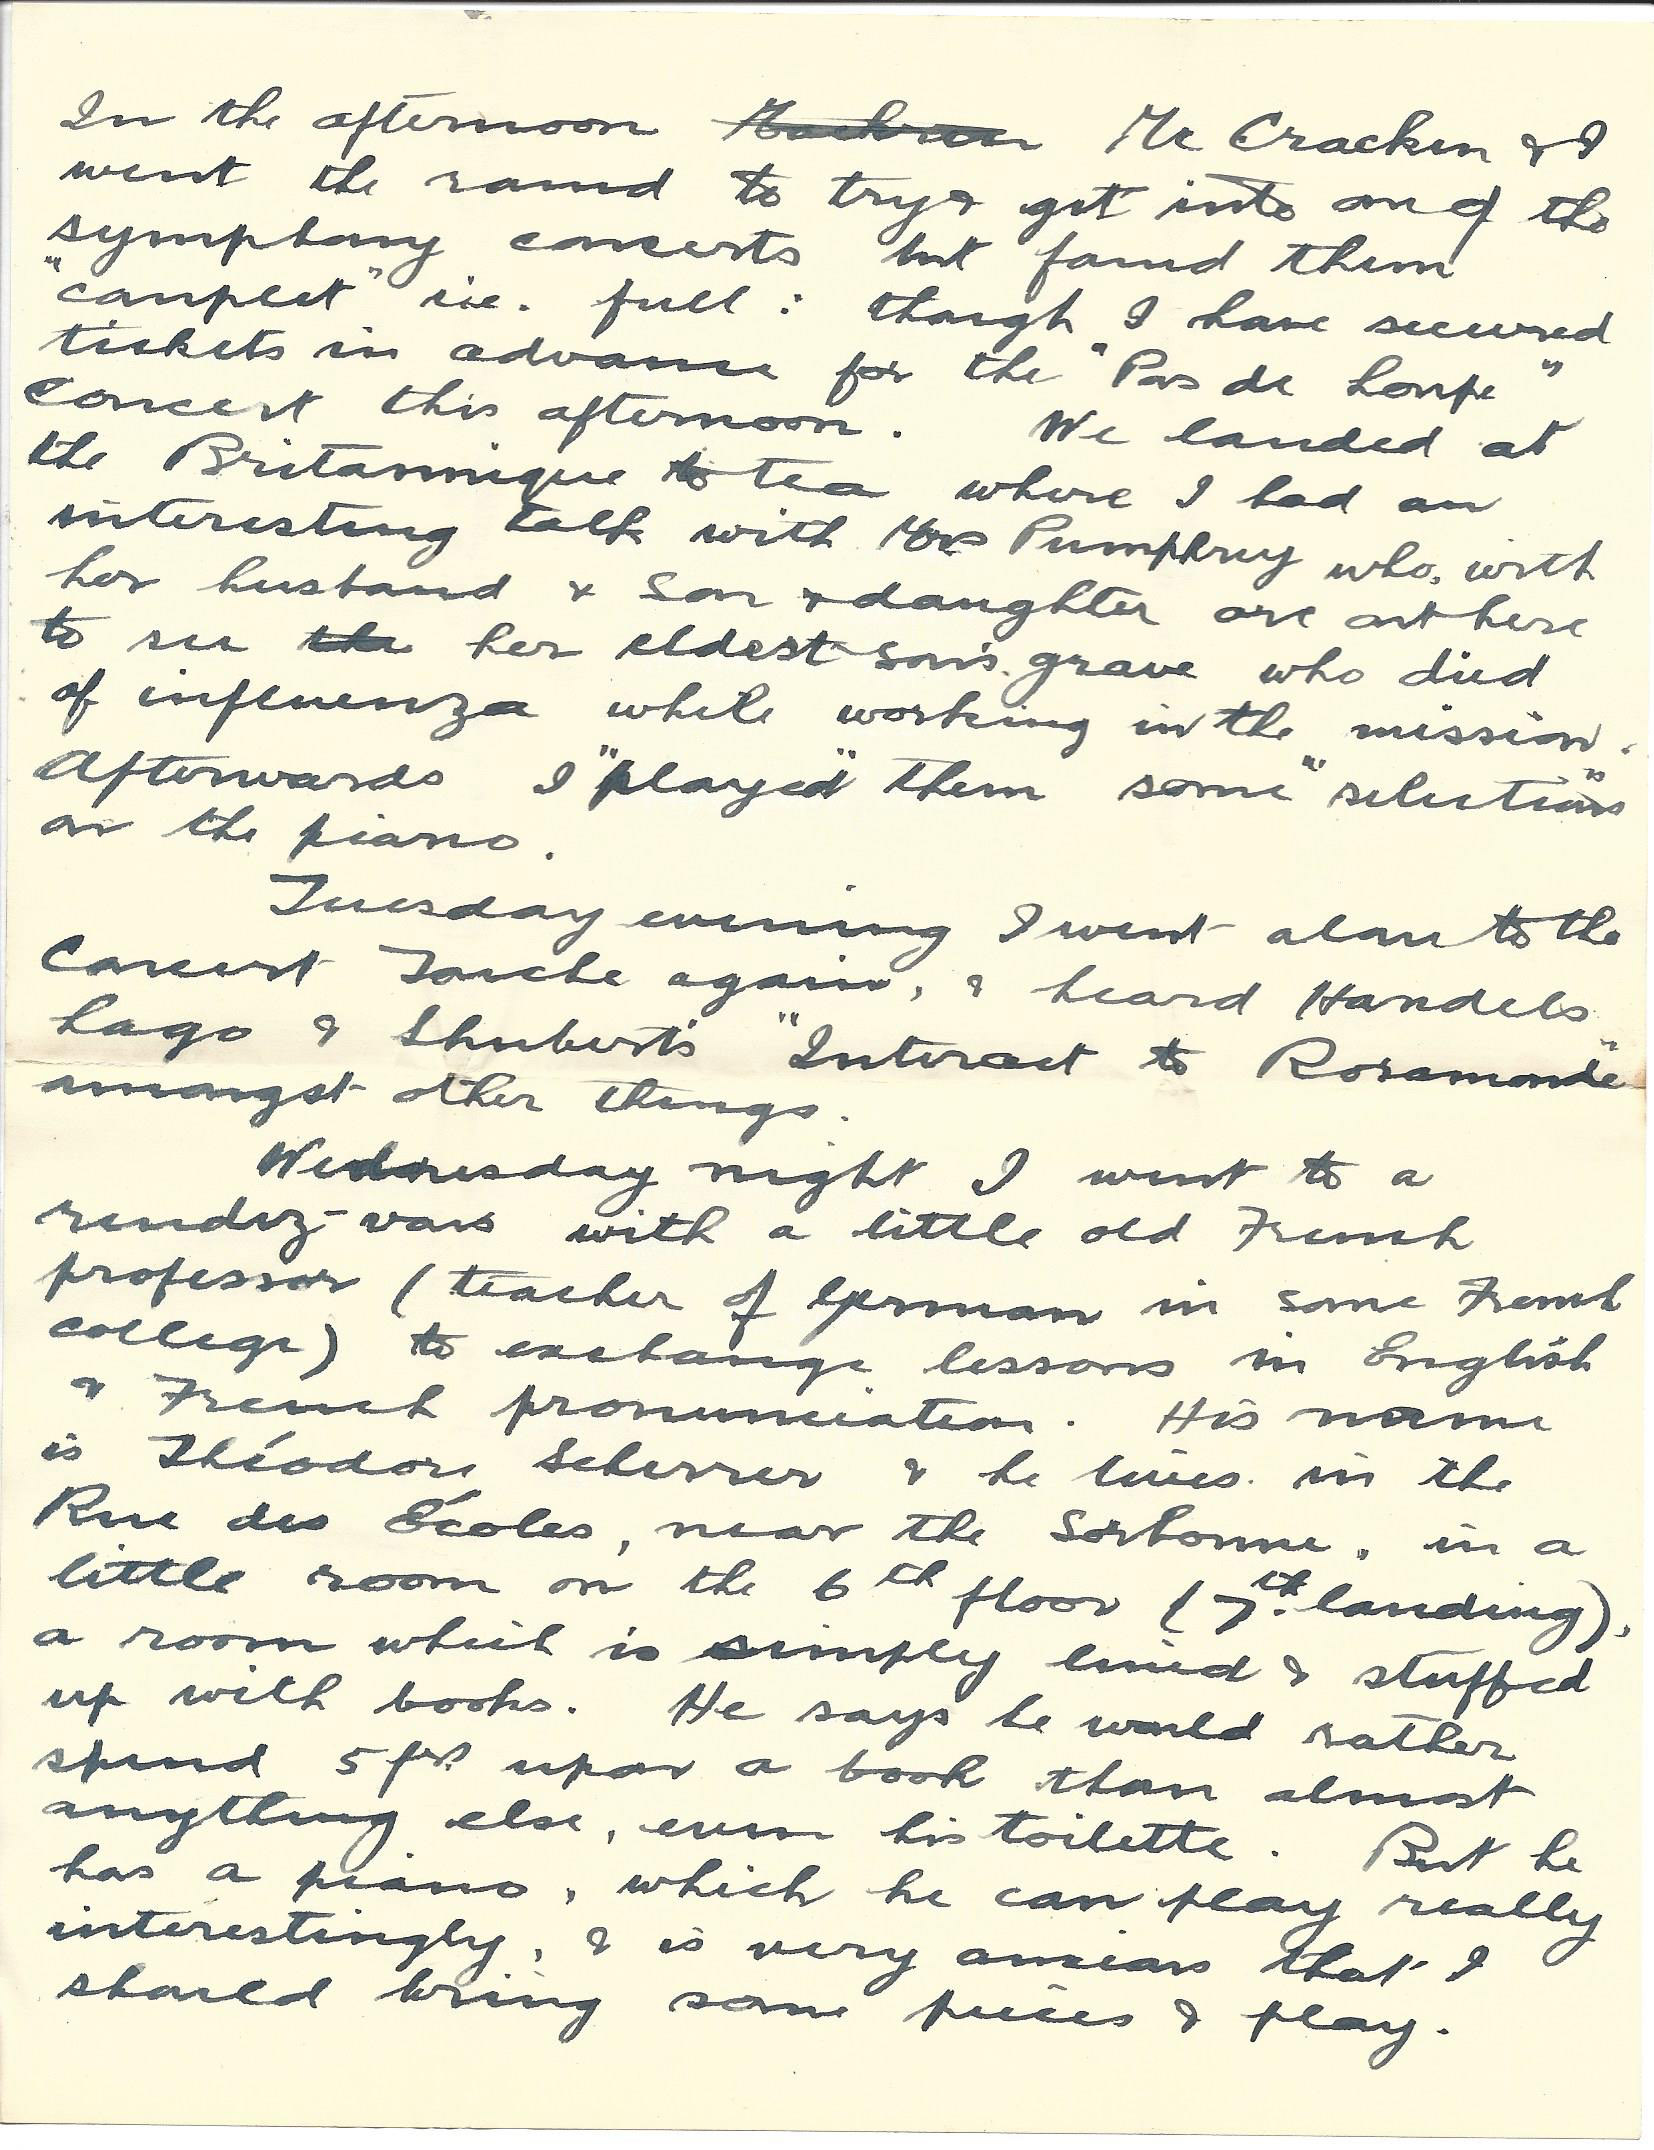 1919-10-19 Page 2 letter by Donald Bearman